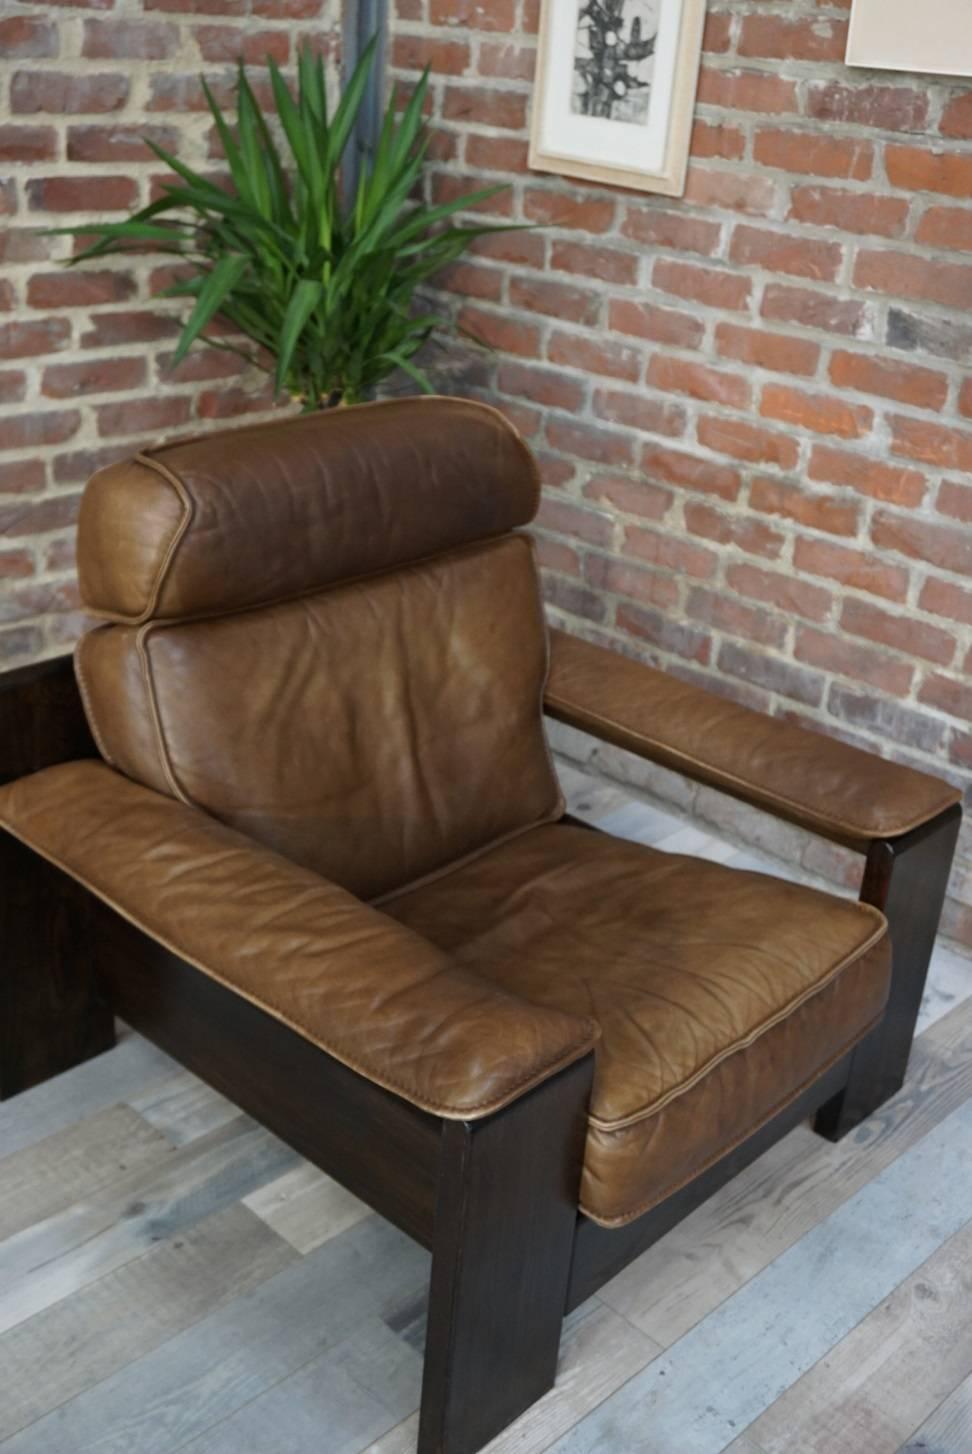 Rare and magnificent leather armchair made by Harry De Groot for Leolux, design of the 1950s only noble materials: solid oak, high quality leather. Beautiful patina and so comfy!